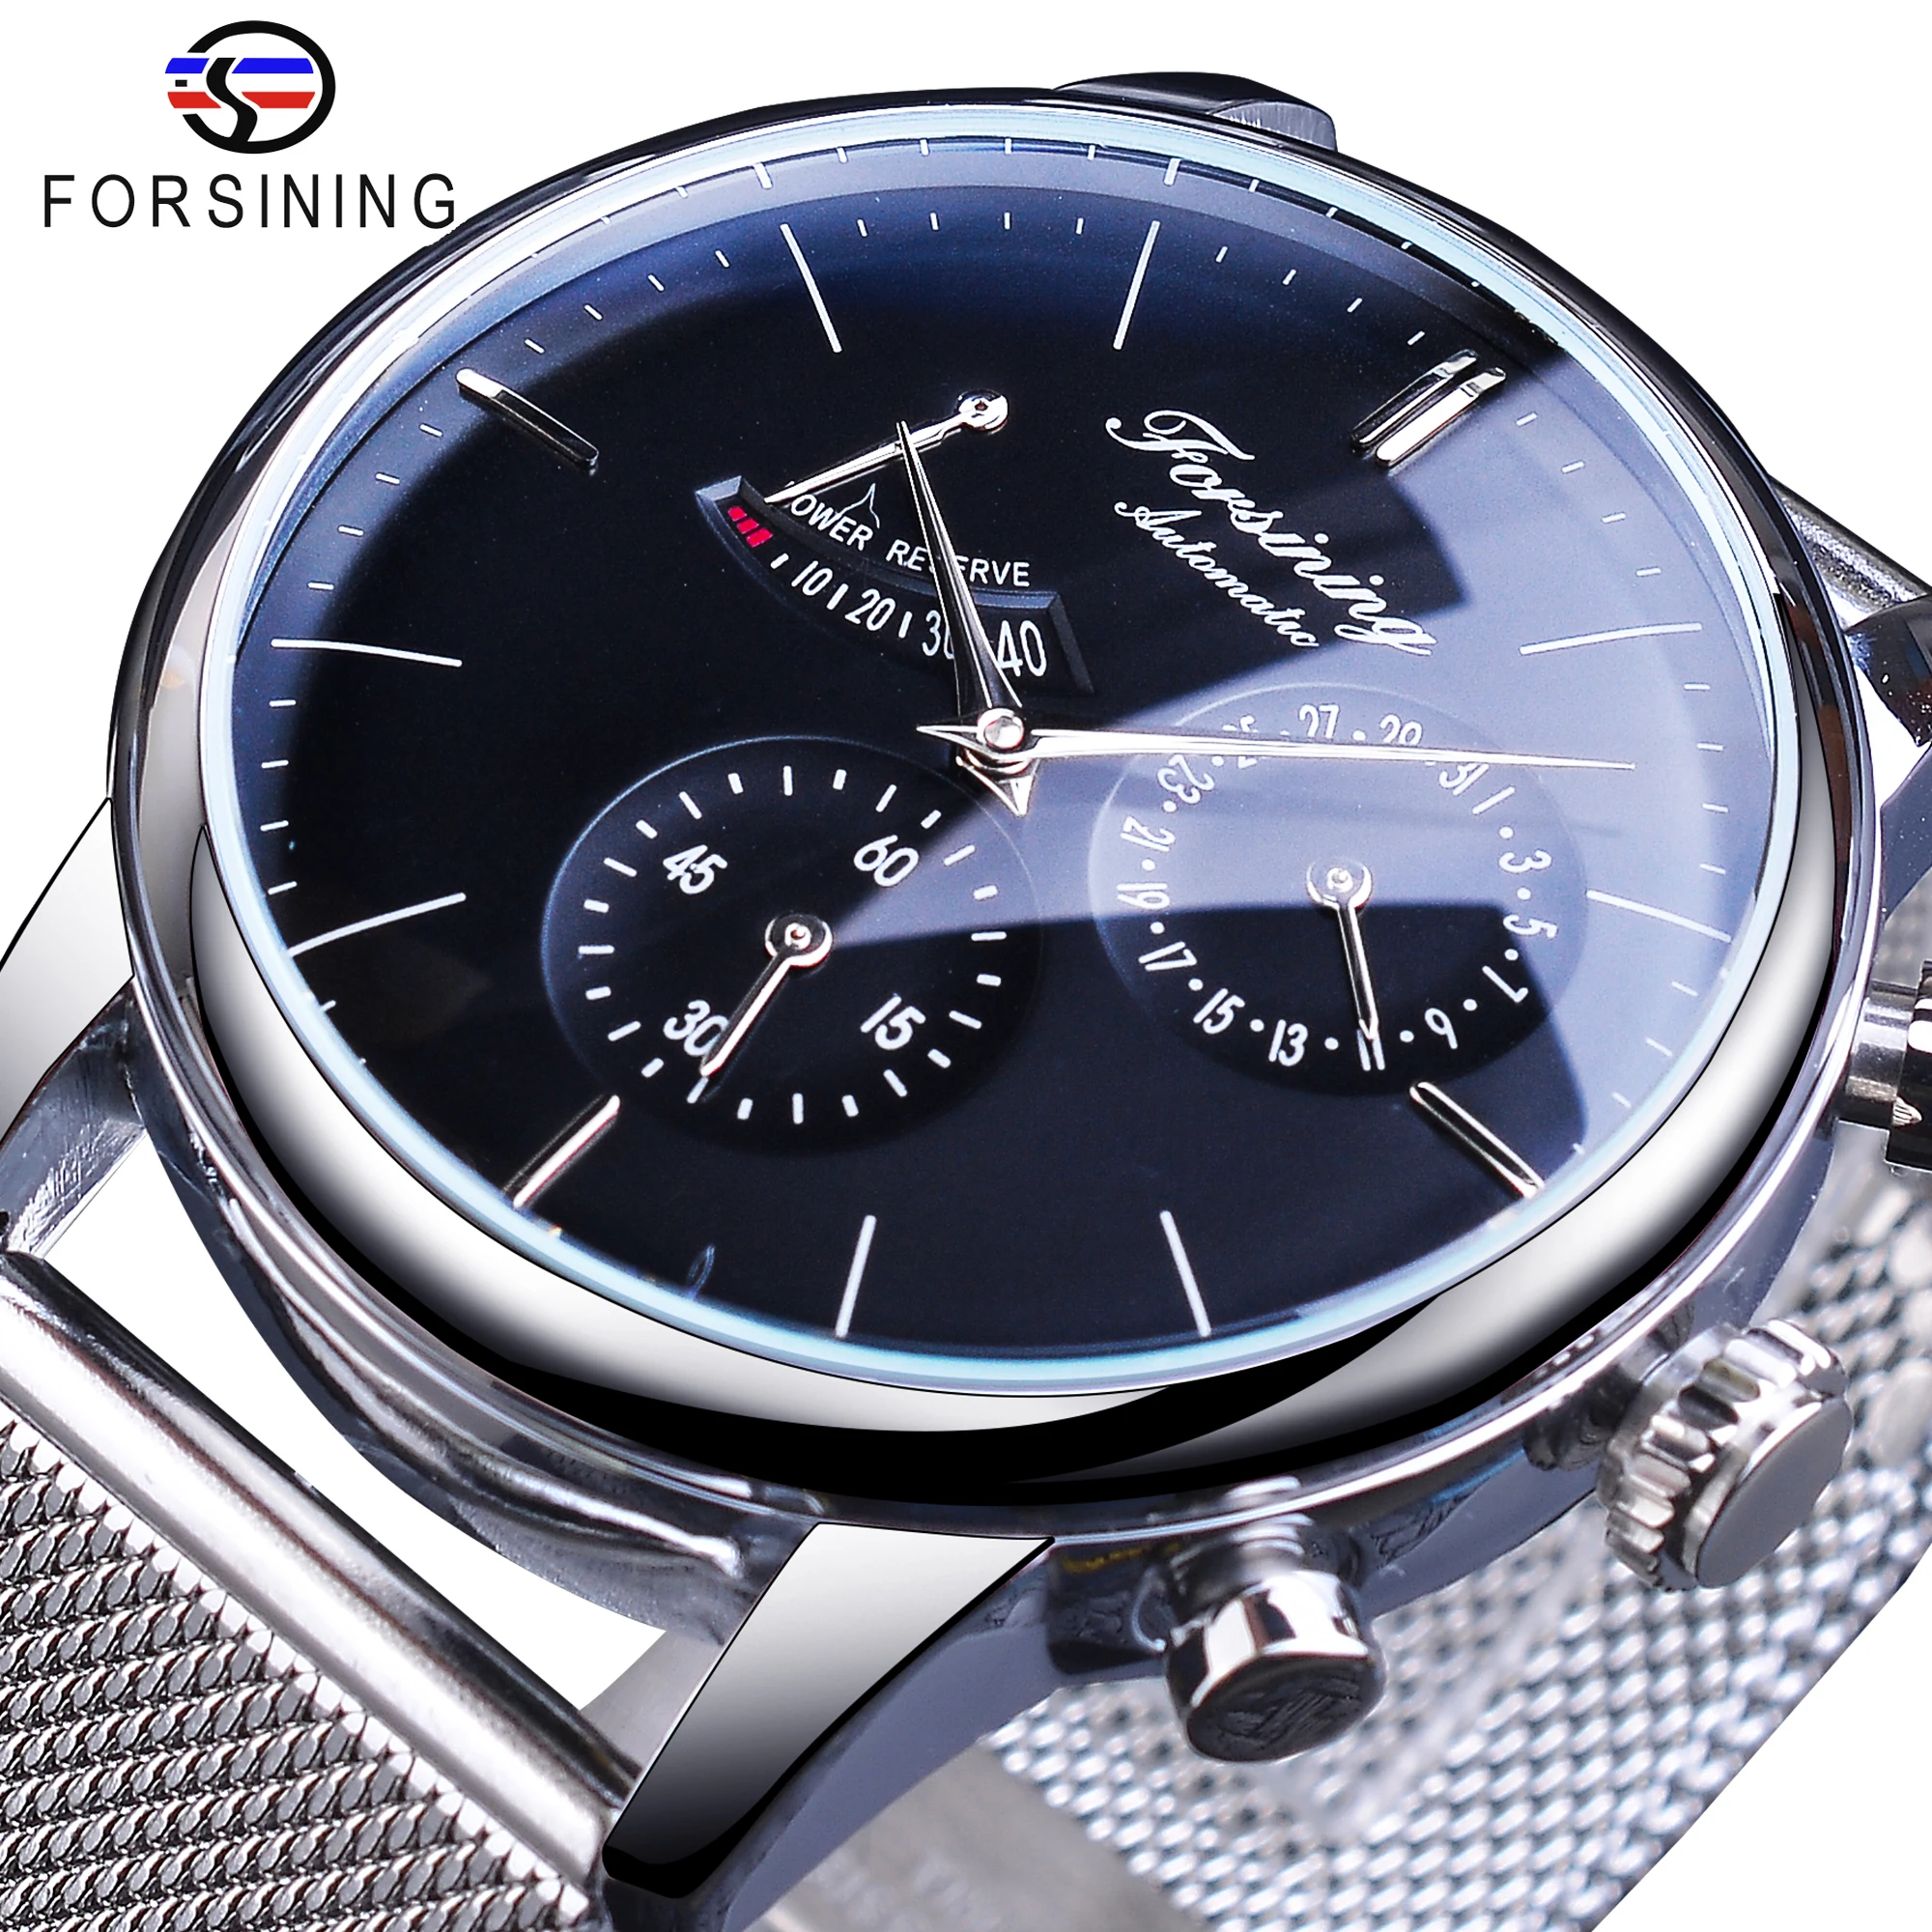 Forsining 2021 Business Fashion Date Design Silver Steel Power Reserve Mens Mechanical Automatic Wrist Watches Top Brand Luxury robot b2 series for samsung galaxy tab a8 10 5 2021 2022 contrast color pc silicone tablet cover kickstand design protective case navy blue yellow green